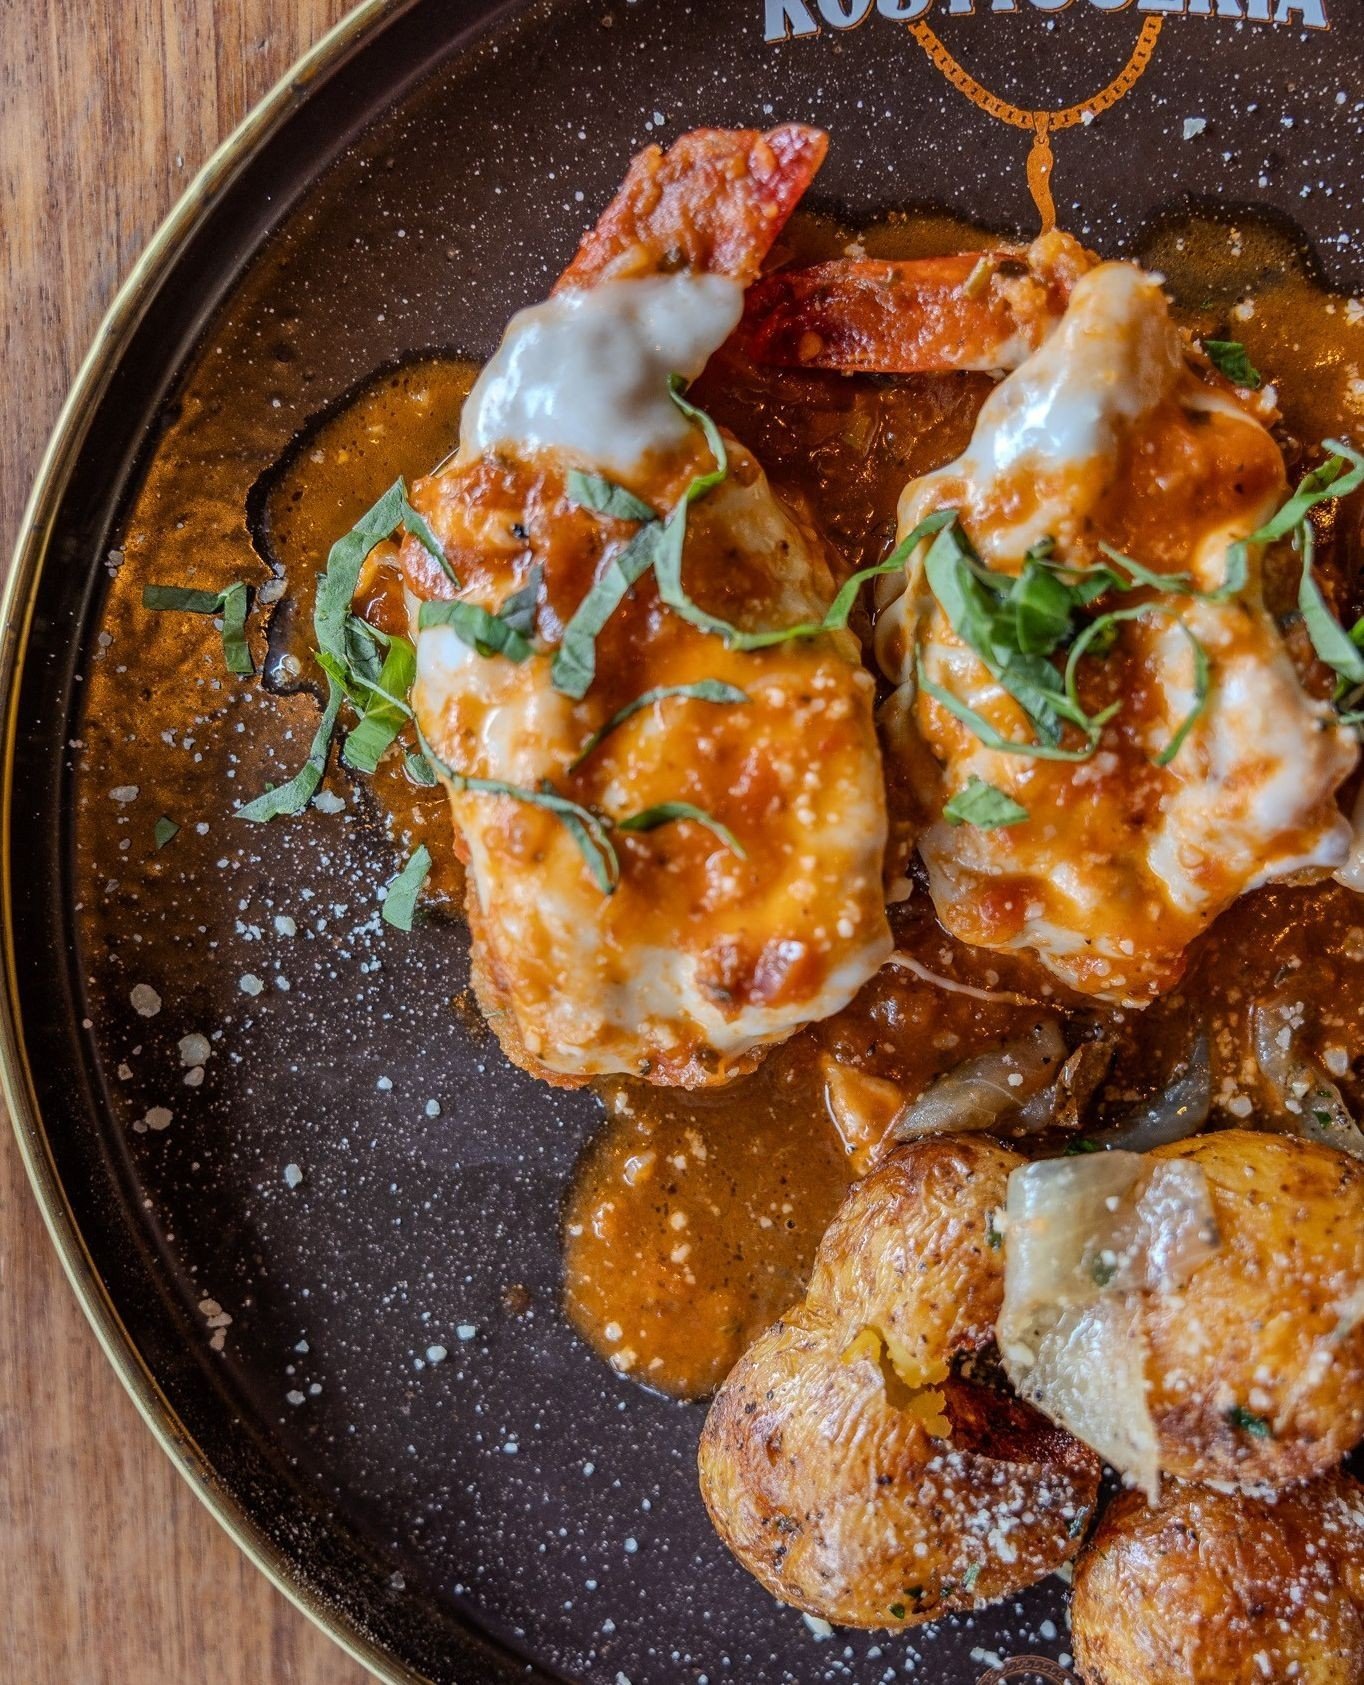 Do you like Chicken Parmesan? Do you like Shrimp? 👀⁠
⁠
Lucky you cause we made them have a baby 🤩⁠
⁠
Just kidding but you definitely have to try our Jumbo Prawn Parmigiano 🤌🏻⁠
⁠
We're on OpenTable for reservations! ⁠
.⁠
.⁠
.⁠
#therosticceria #ros